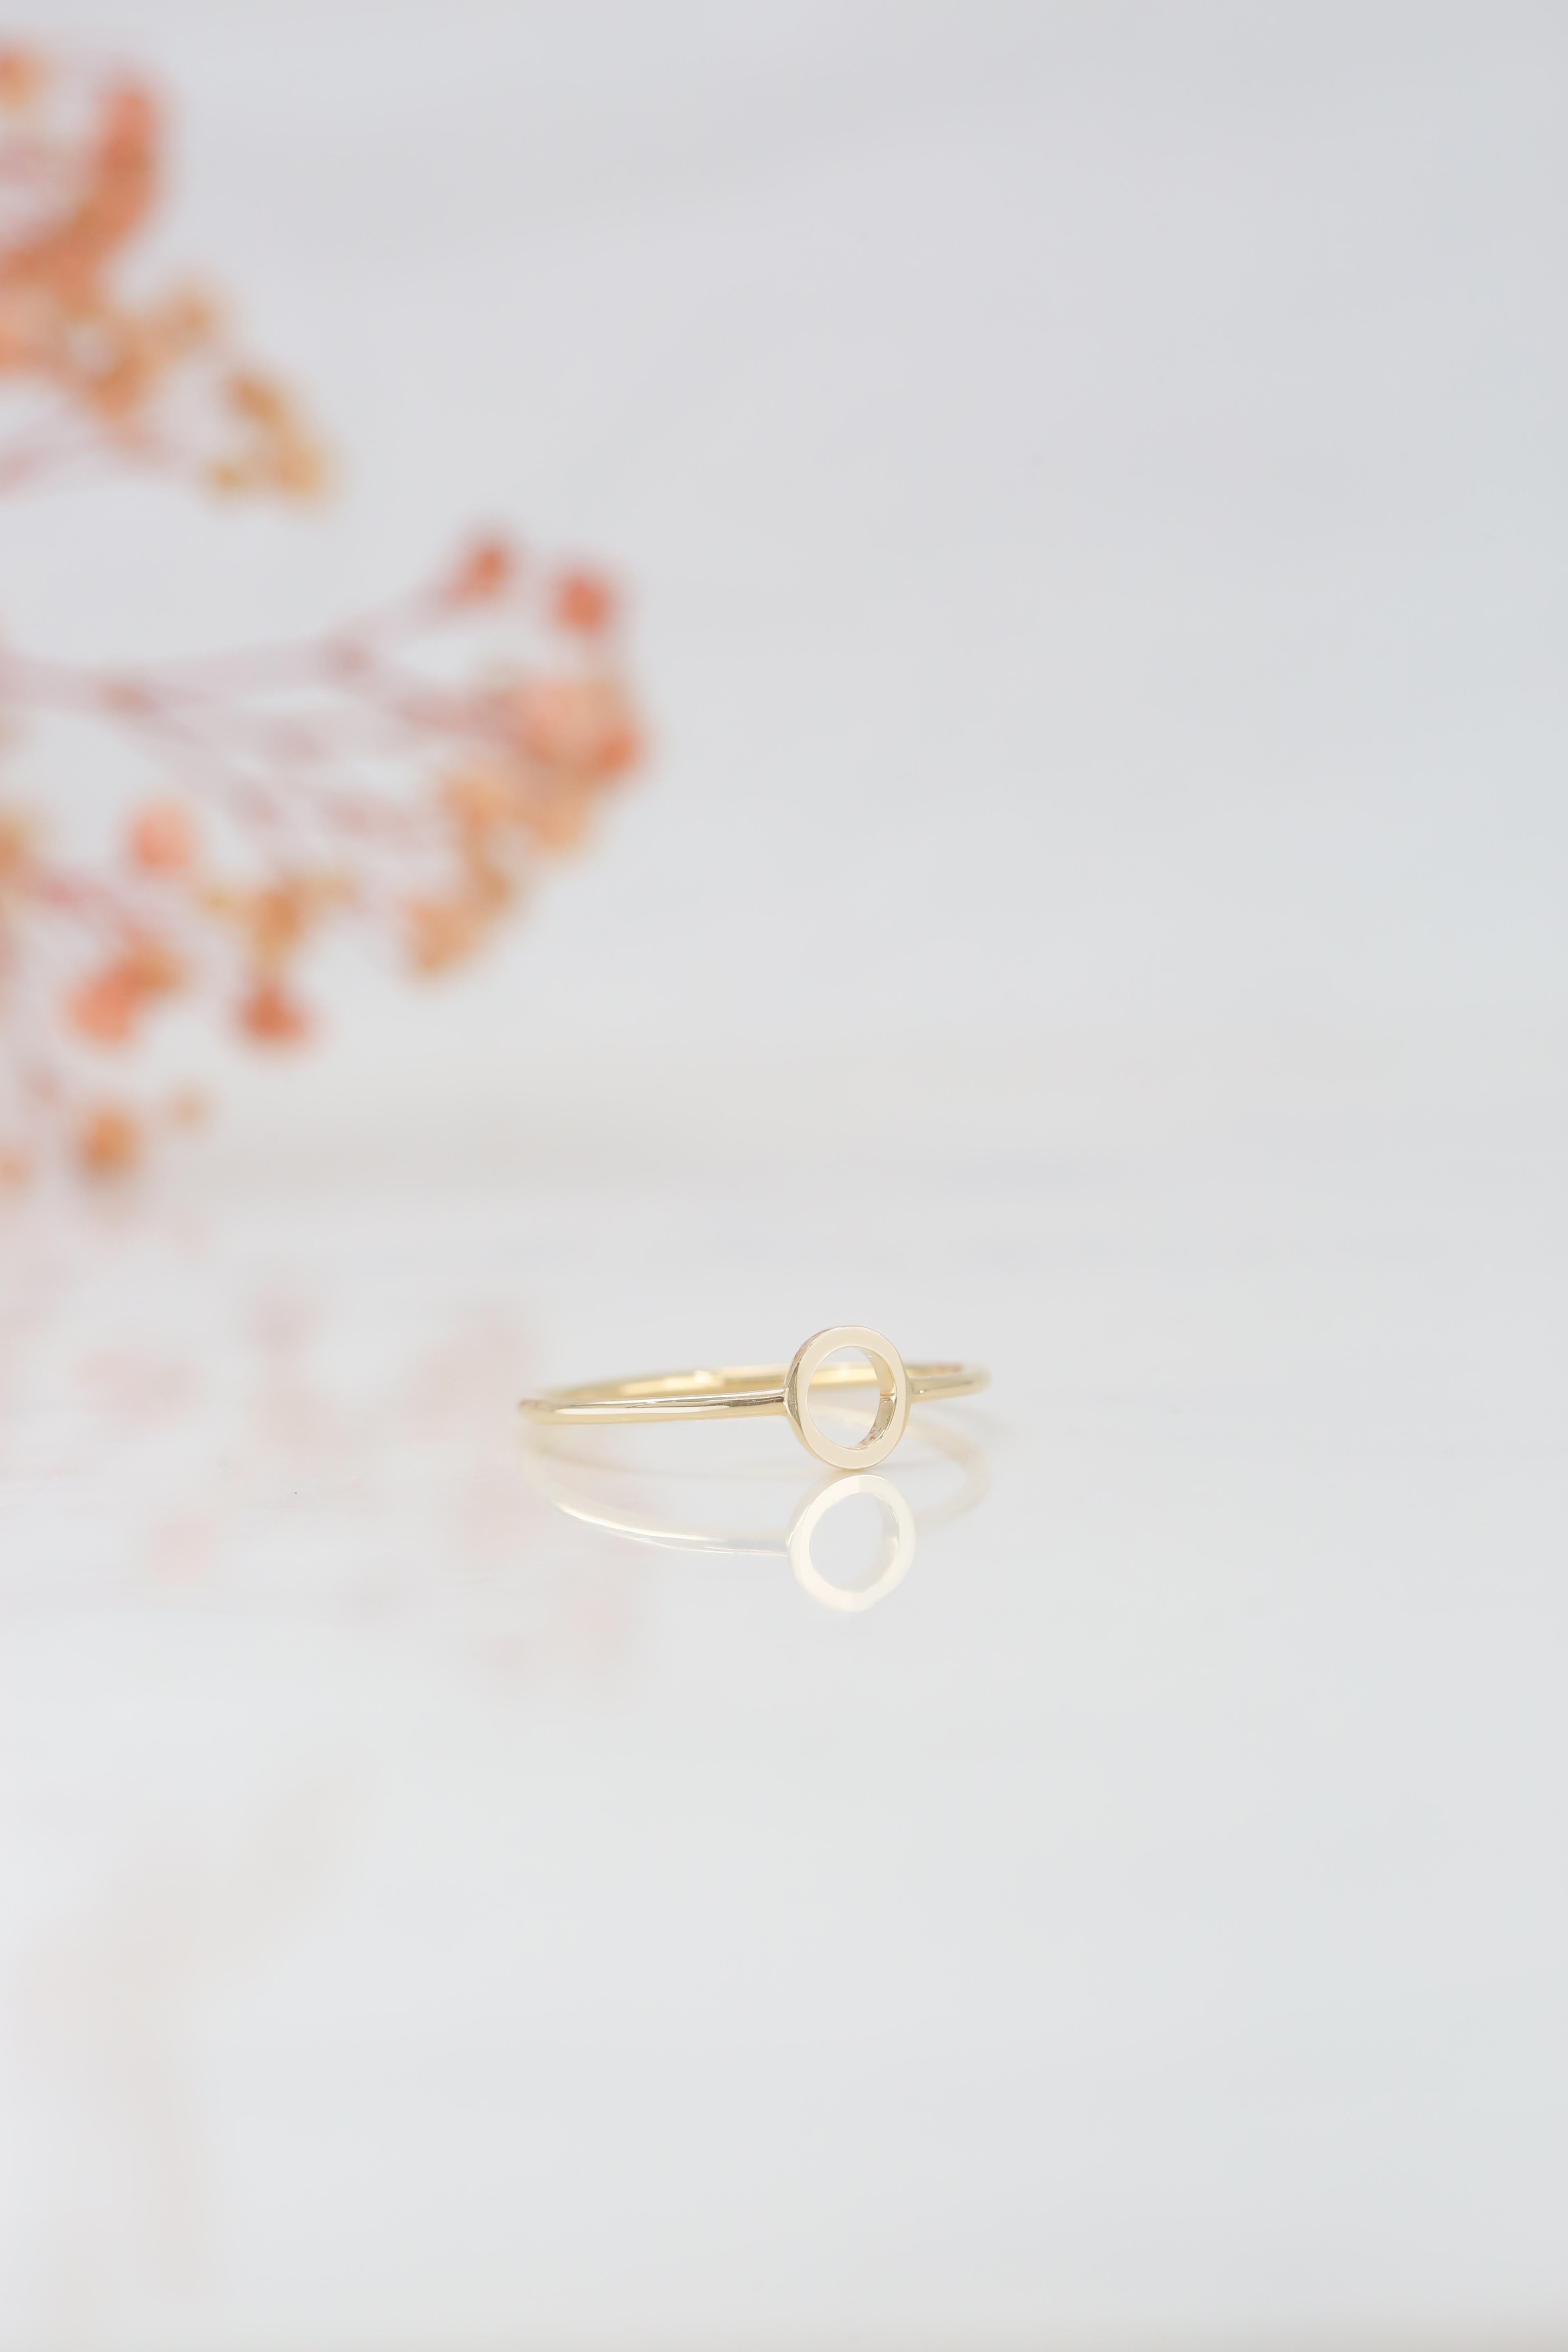 For Sale:  14K Gold Initial O Letter Ring, Personalized Initial Letter Ring 7